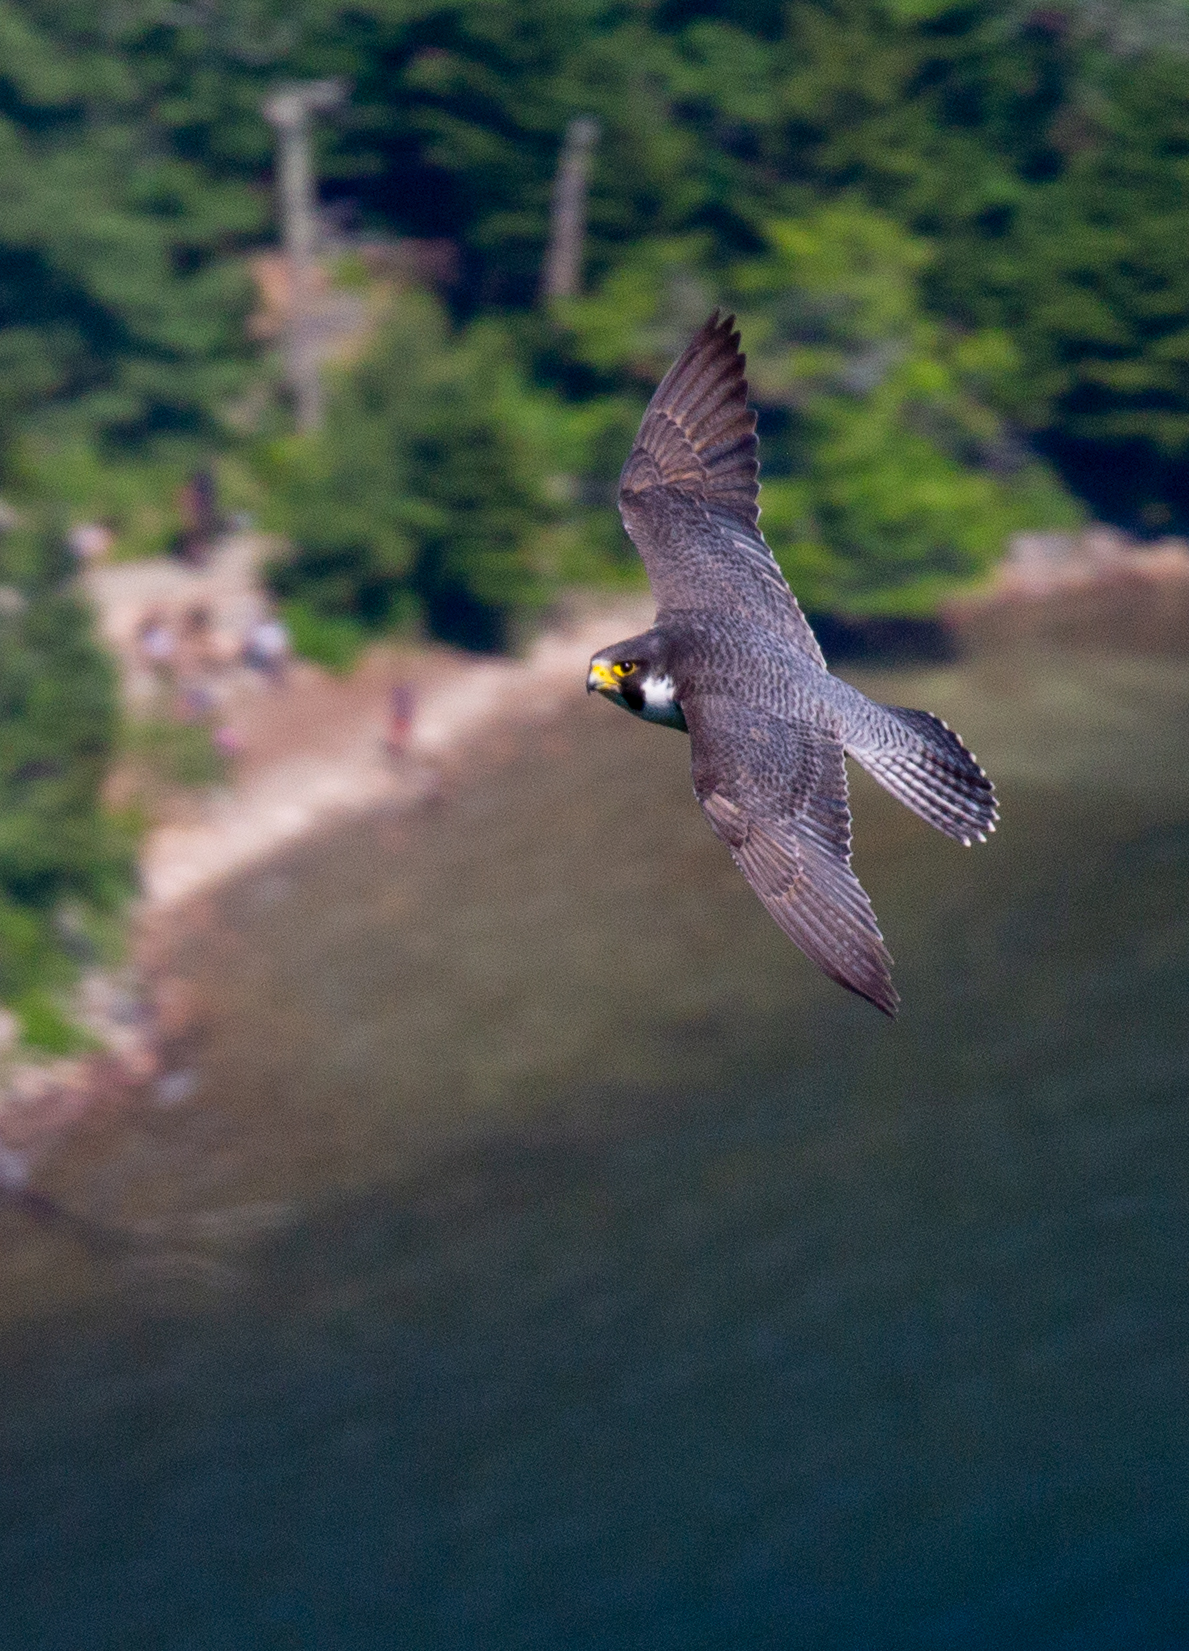 Wandering” Park How Peregrine Falcons Connect National Parks (U.S. National Park Service)